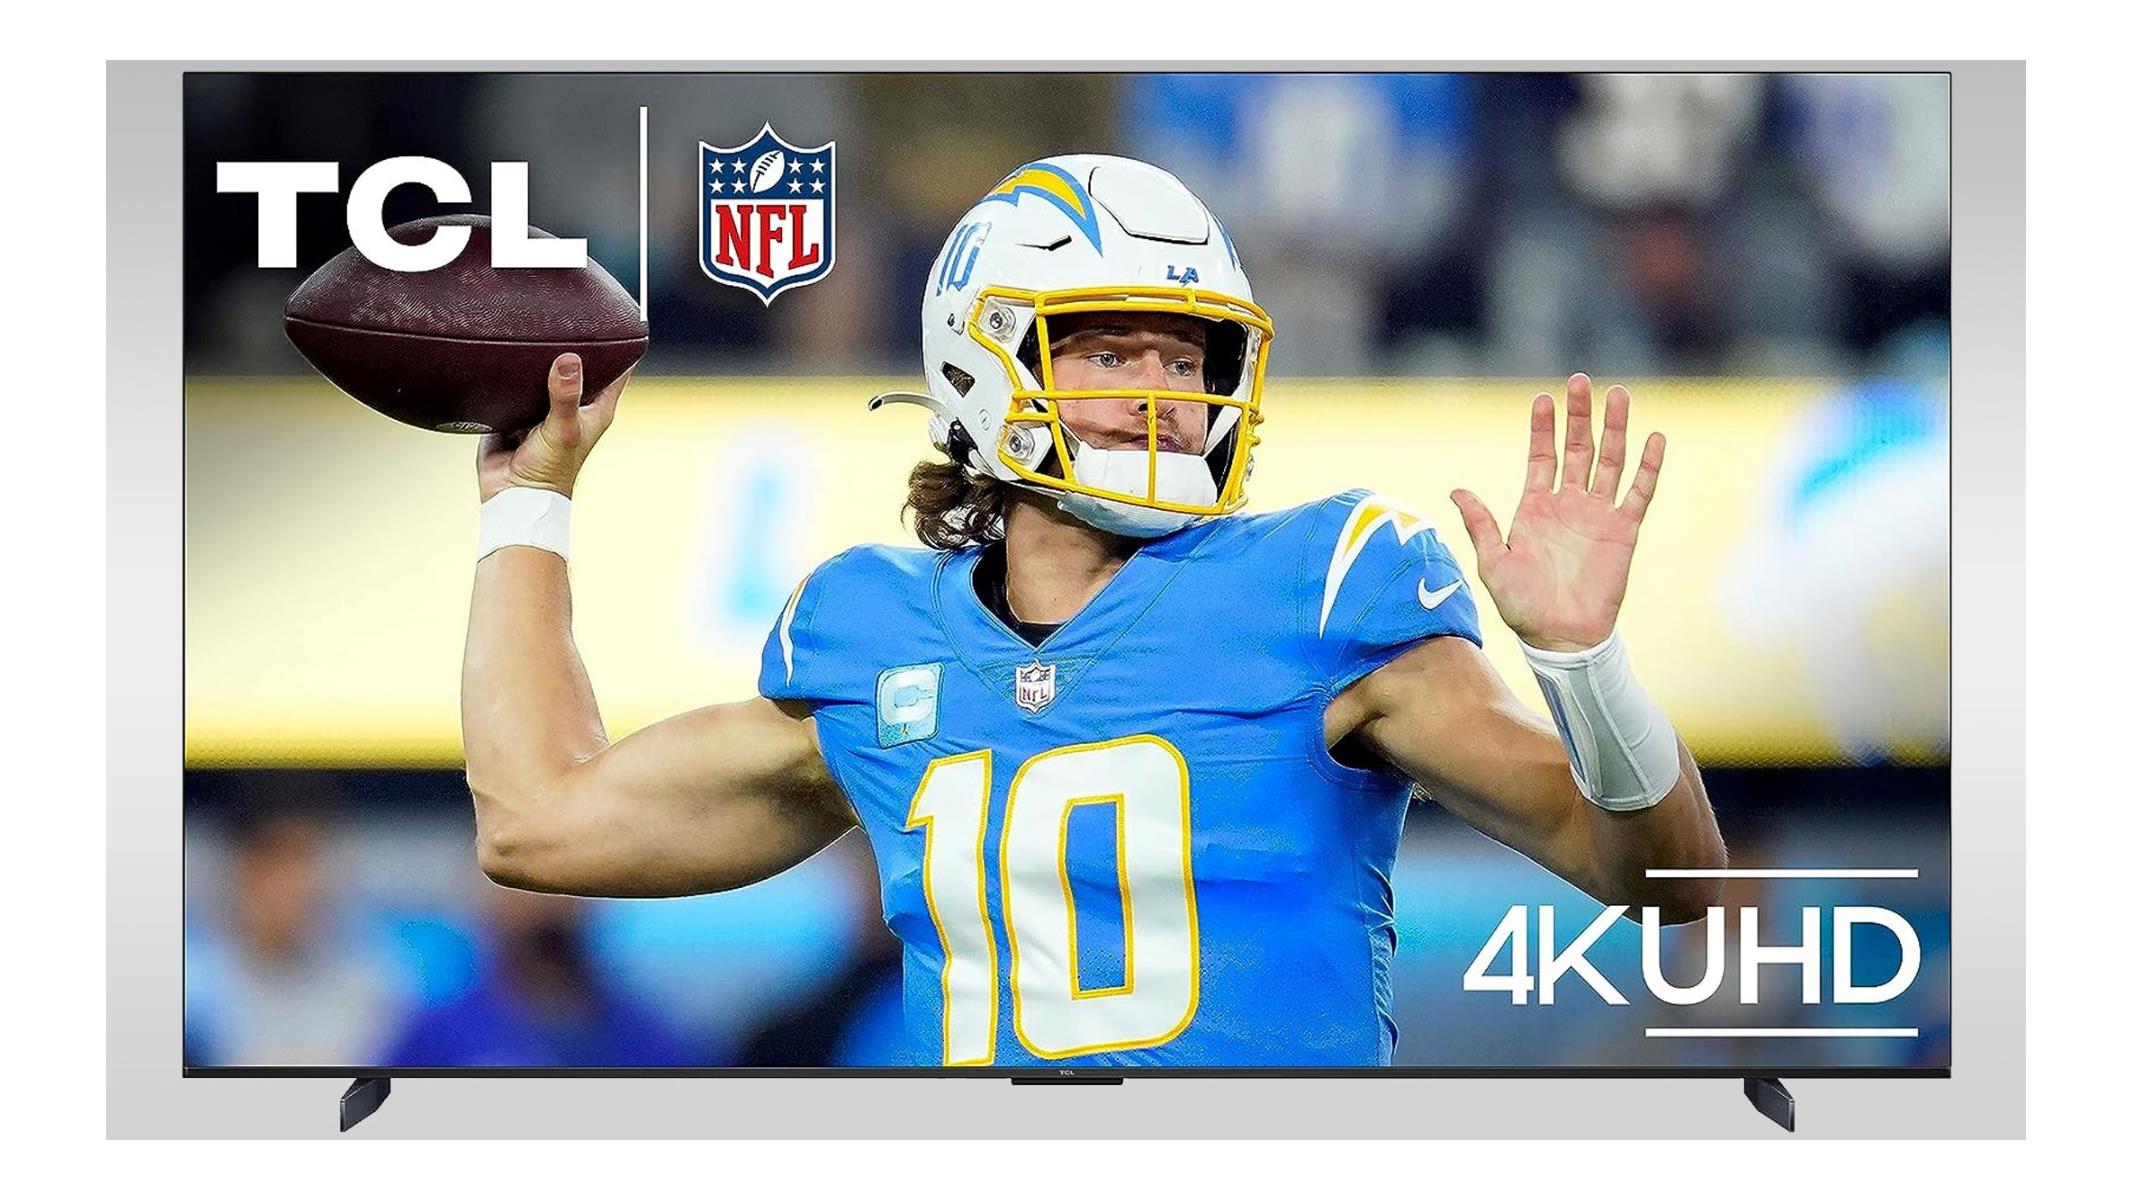 Gear Up For NFL Football Season With These 4K TV Deals From Samsung, LG And Others HotHardware